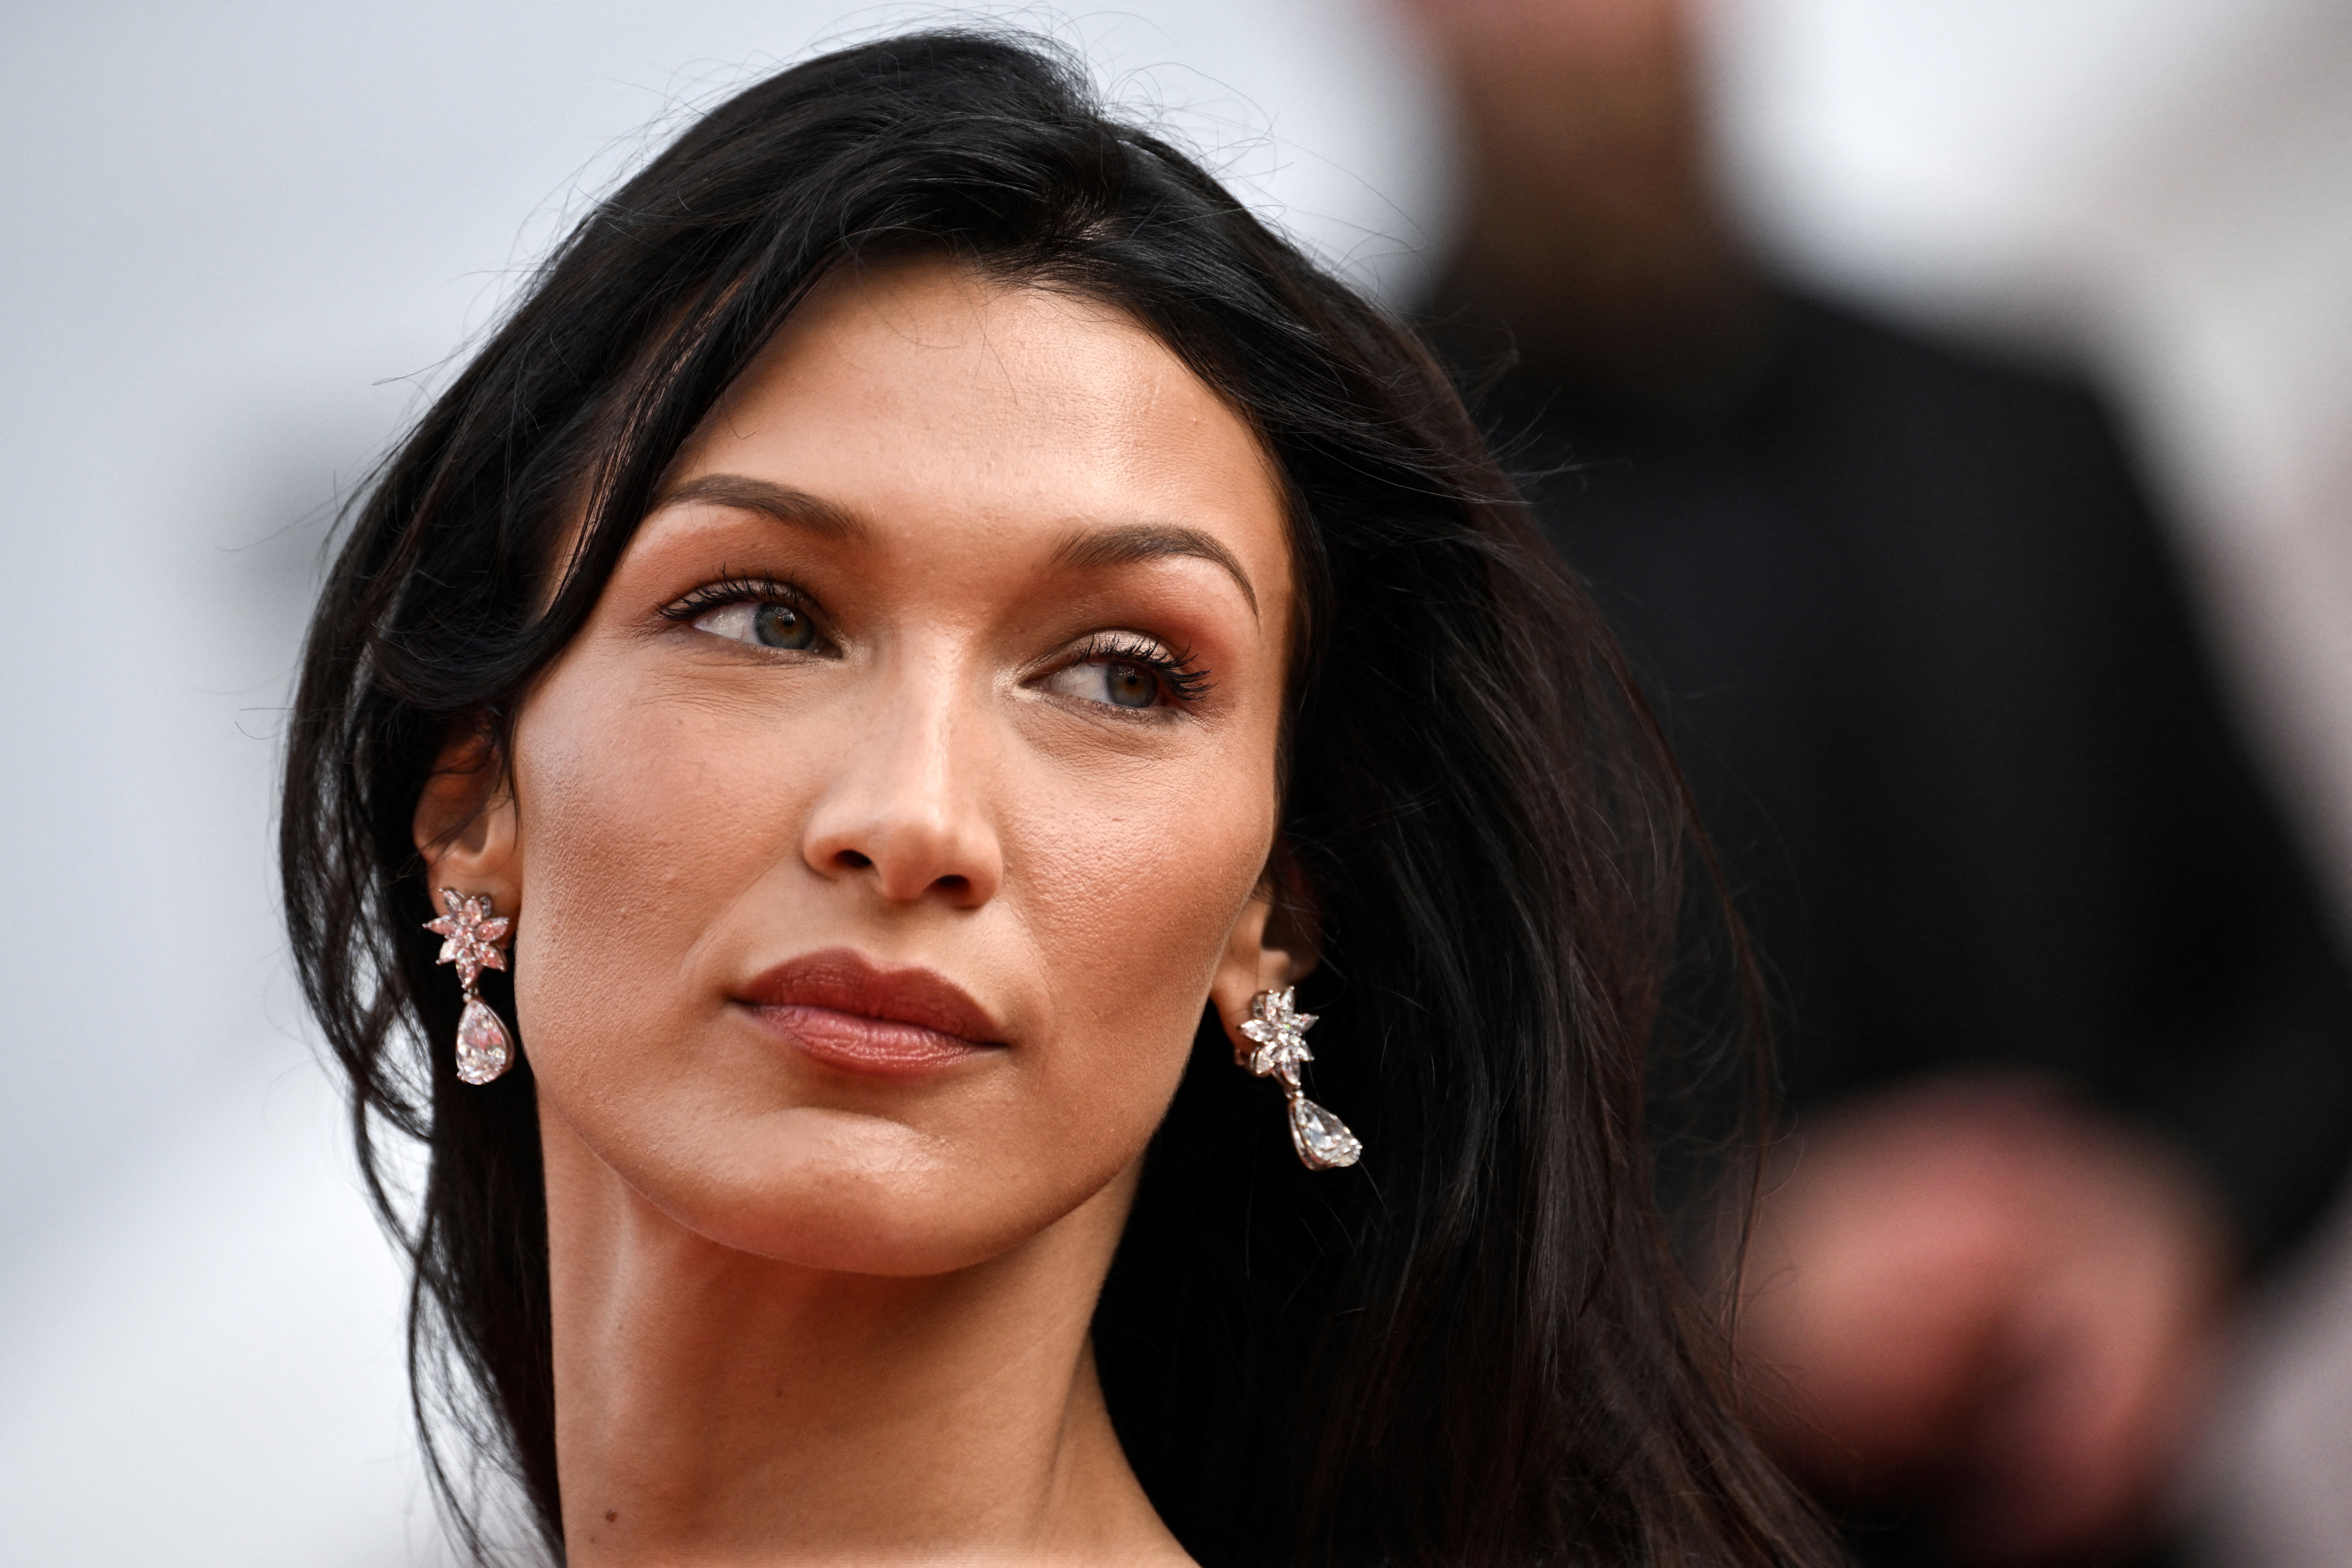 Bella Hadid says she lost modelling jobs for supporting Palestine